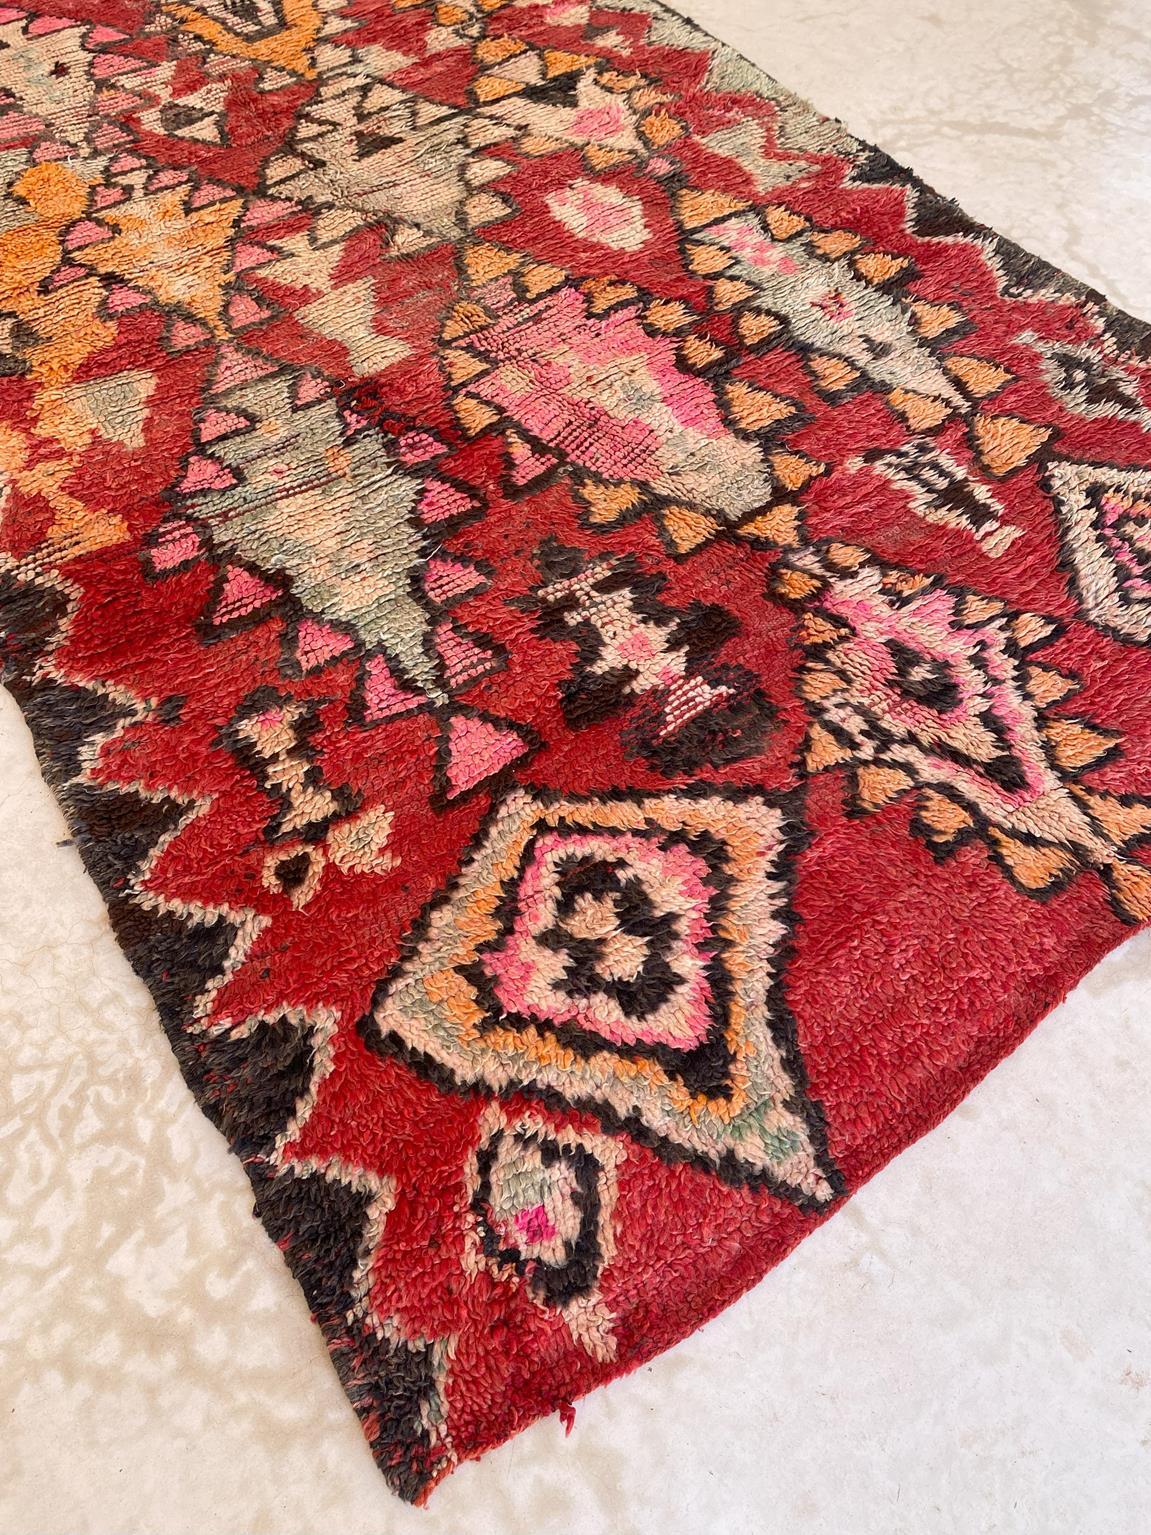 Vintage Moroccan Rehamna rug - Red/pink - 5.9x12.2feet / 180x373cm For Sale 2